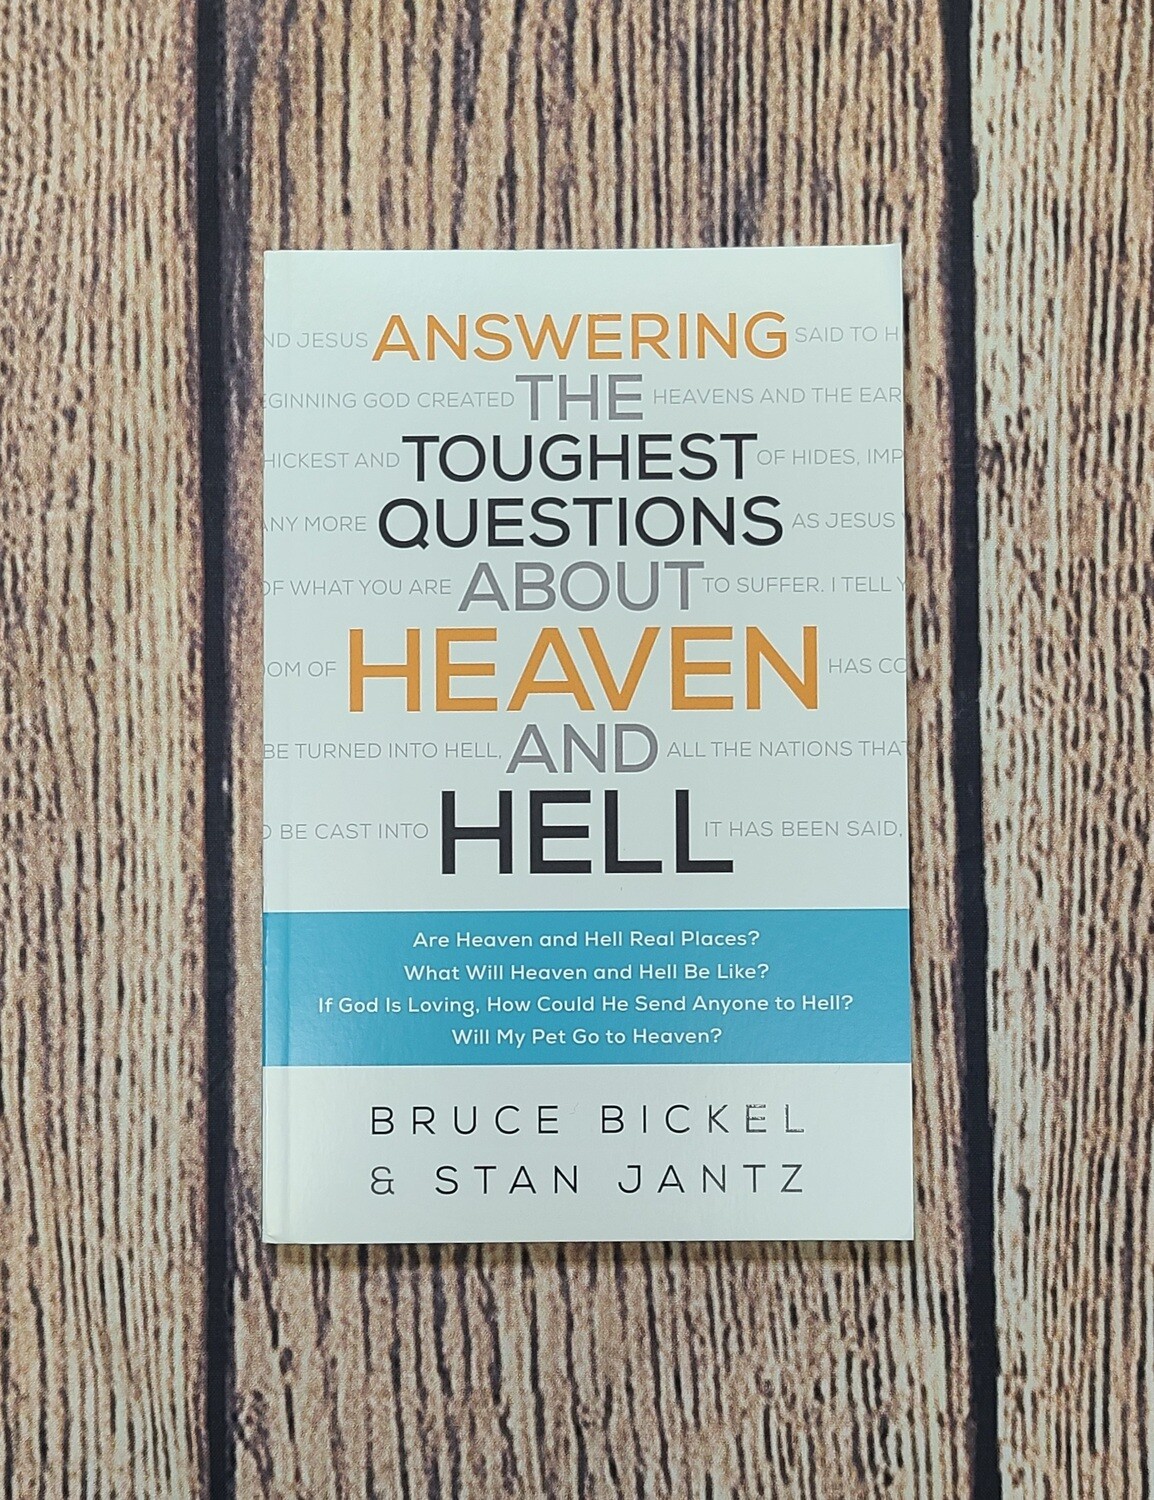 Answering the Toughest Questions About Heaven and Hell by Bruce Bickel and Stan Jantz